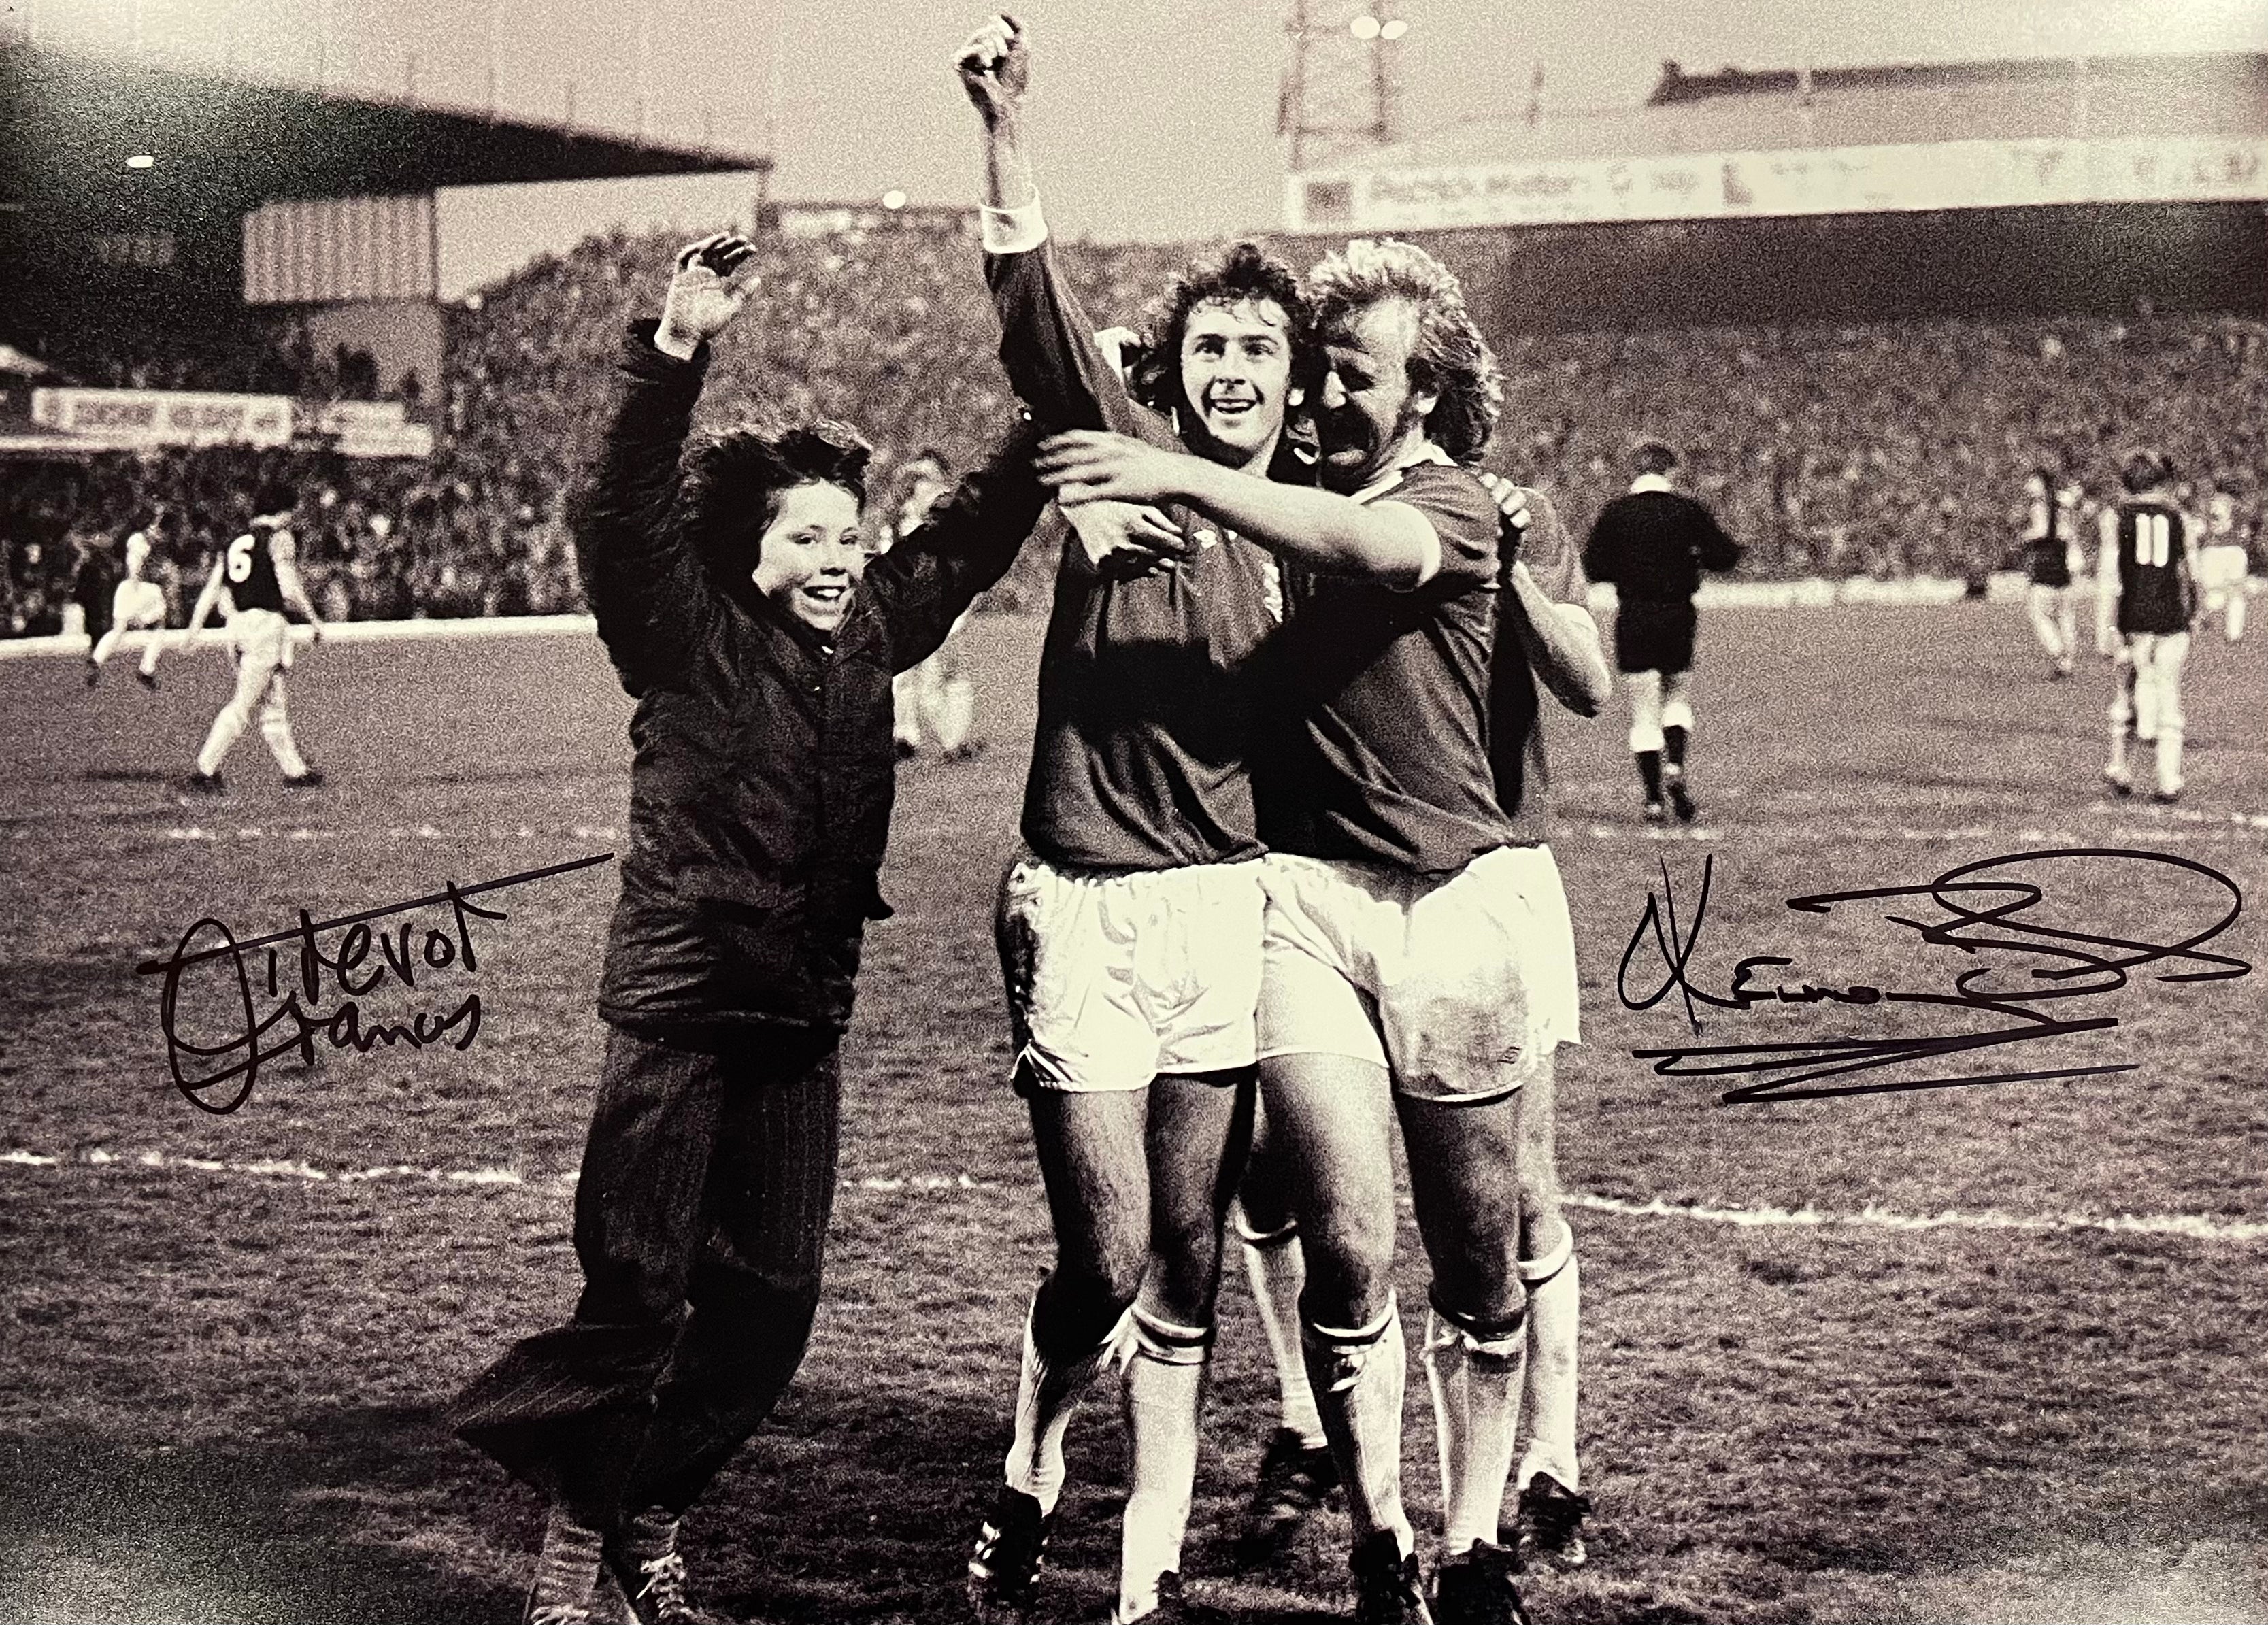 16 x 12" Photo - Trevor Francis and Kenny Burns celebrate a goal against Aston Villa. Signed by both players